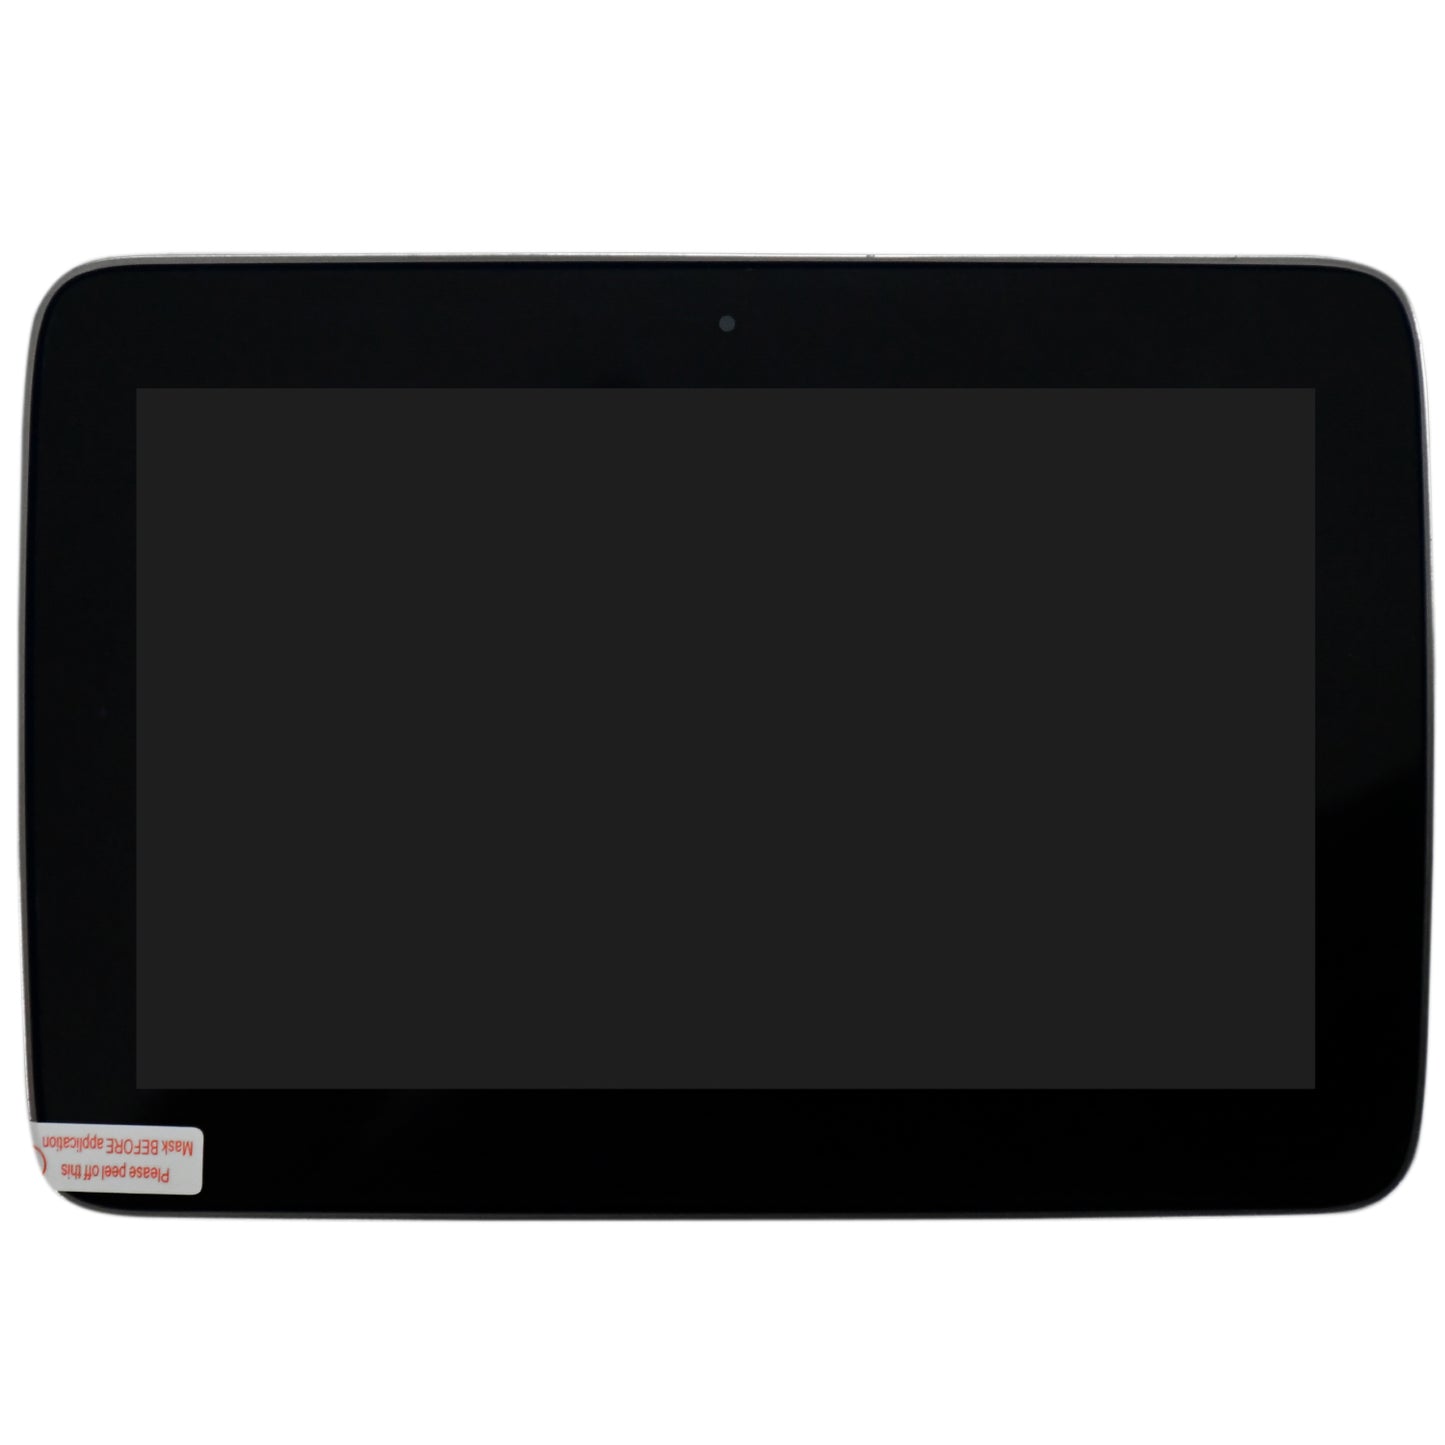 
                  
                    Android Screen for Jaguar Xf 2012-2015
                  
                